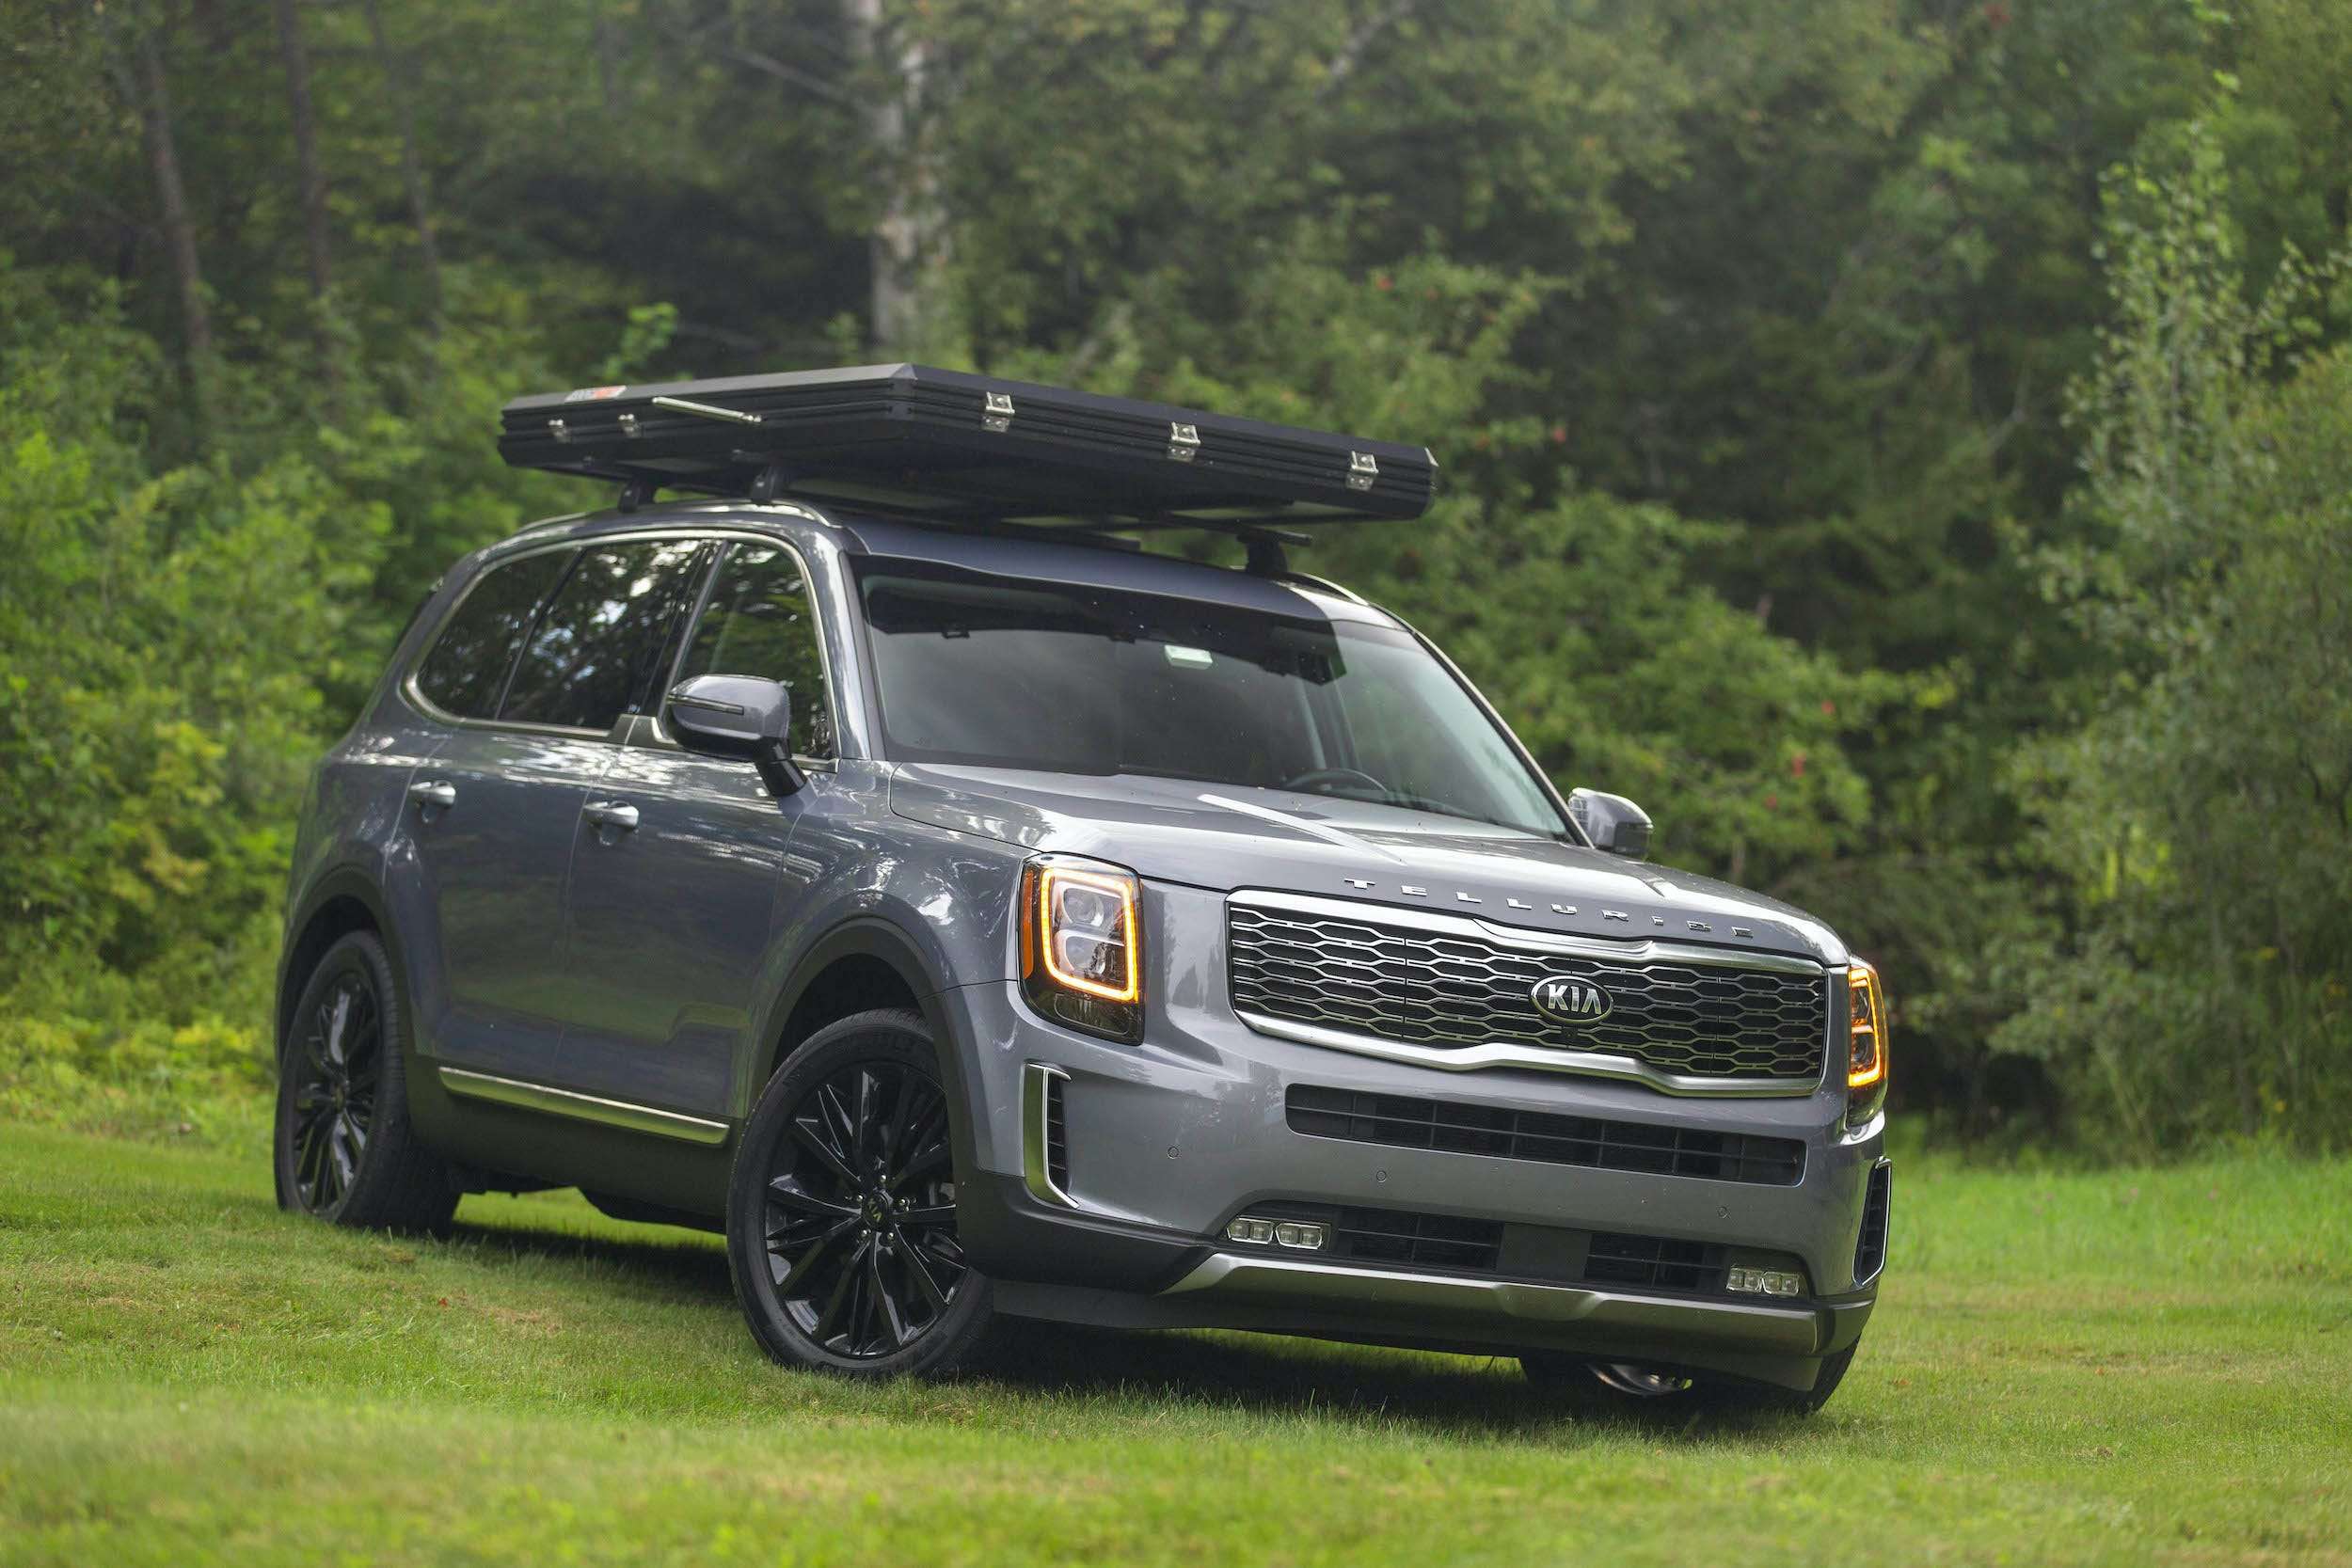 I slept in the Kia Telluride's 3,400 roof tent and it made camping fun